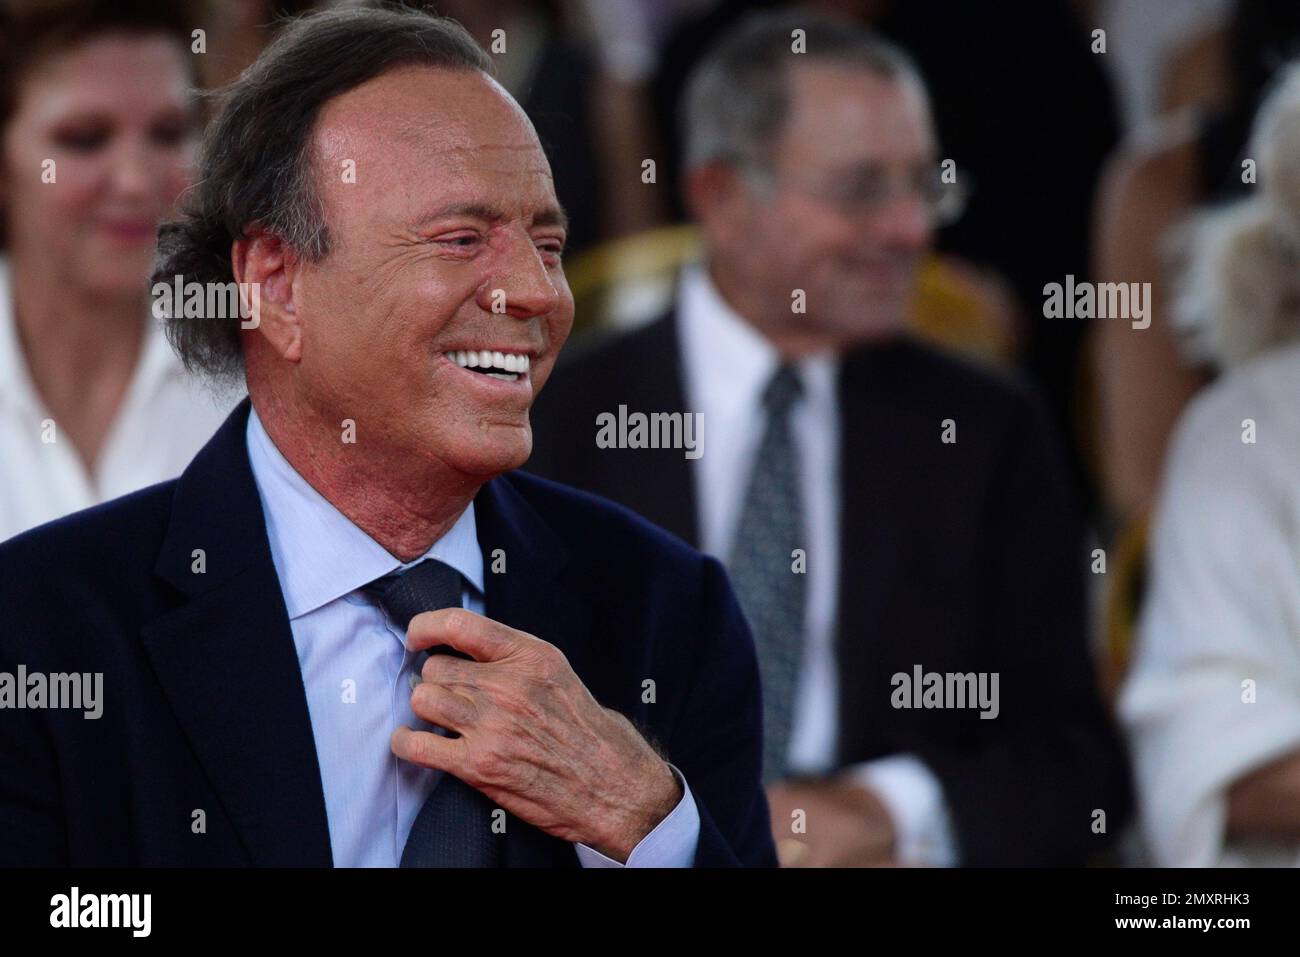 Spanish judge rules 43-year-old man is son of Julio Iglesias